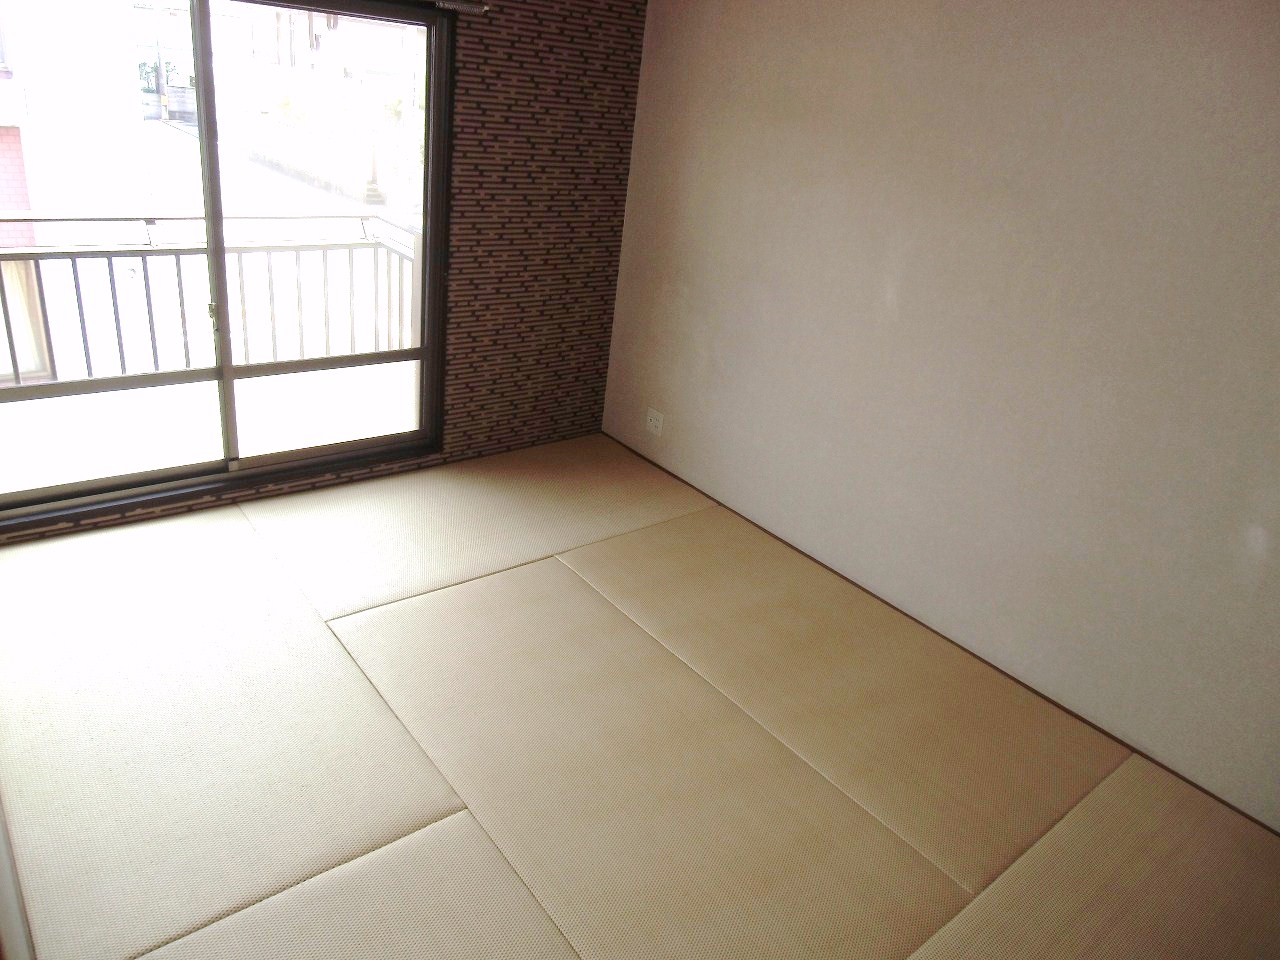 Living and room. A Japanese-style floor plan ^^